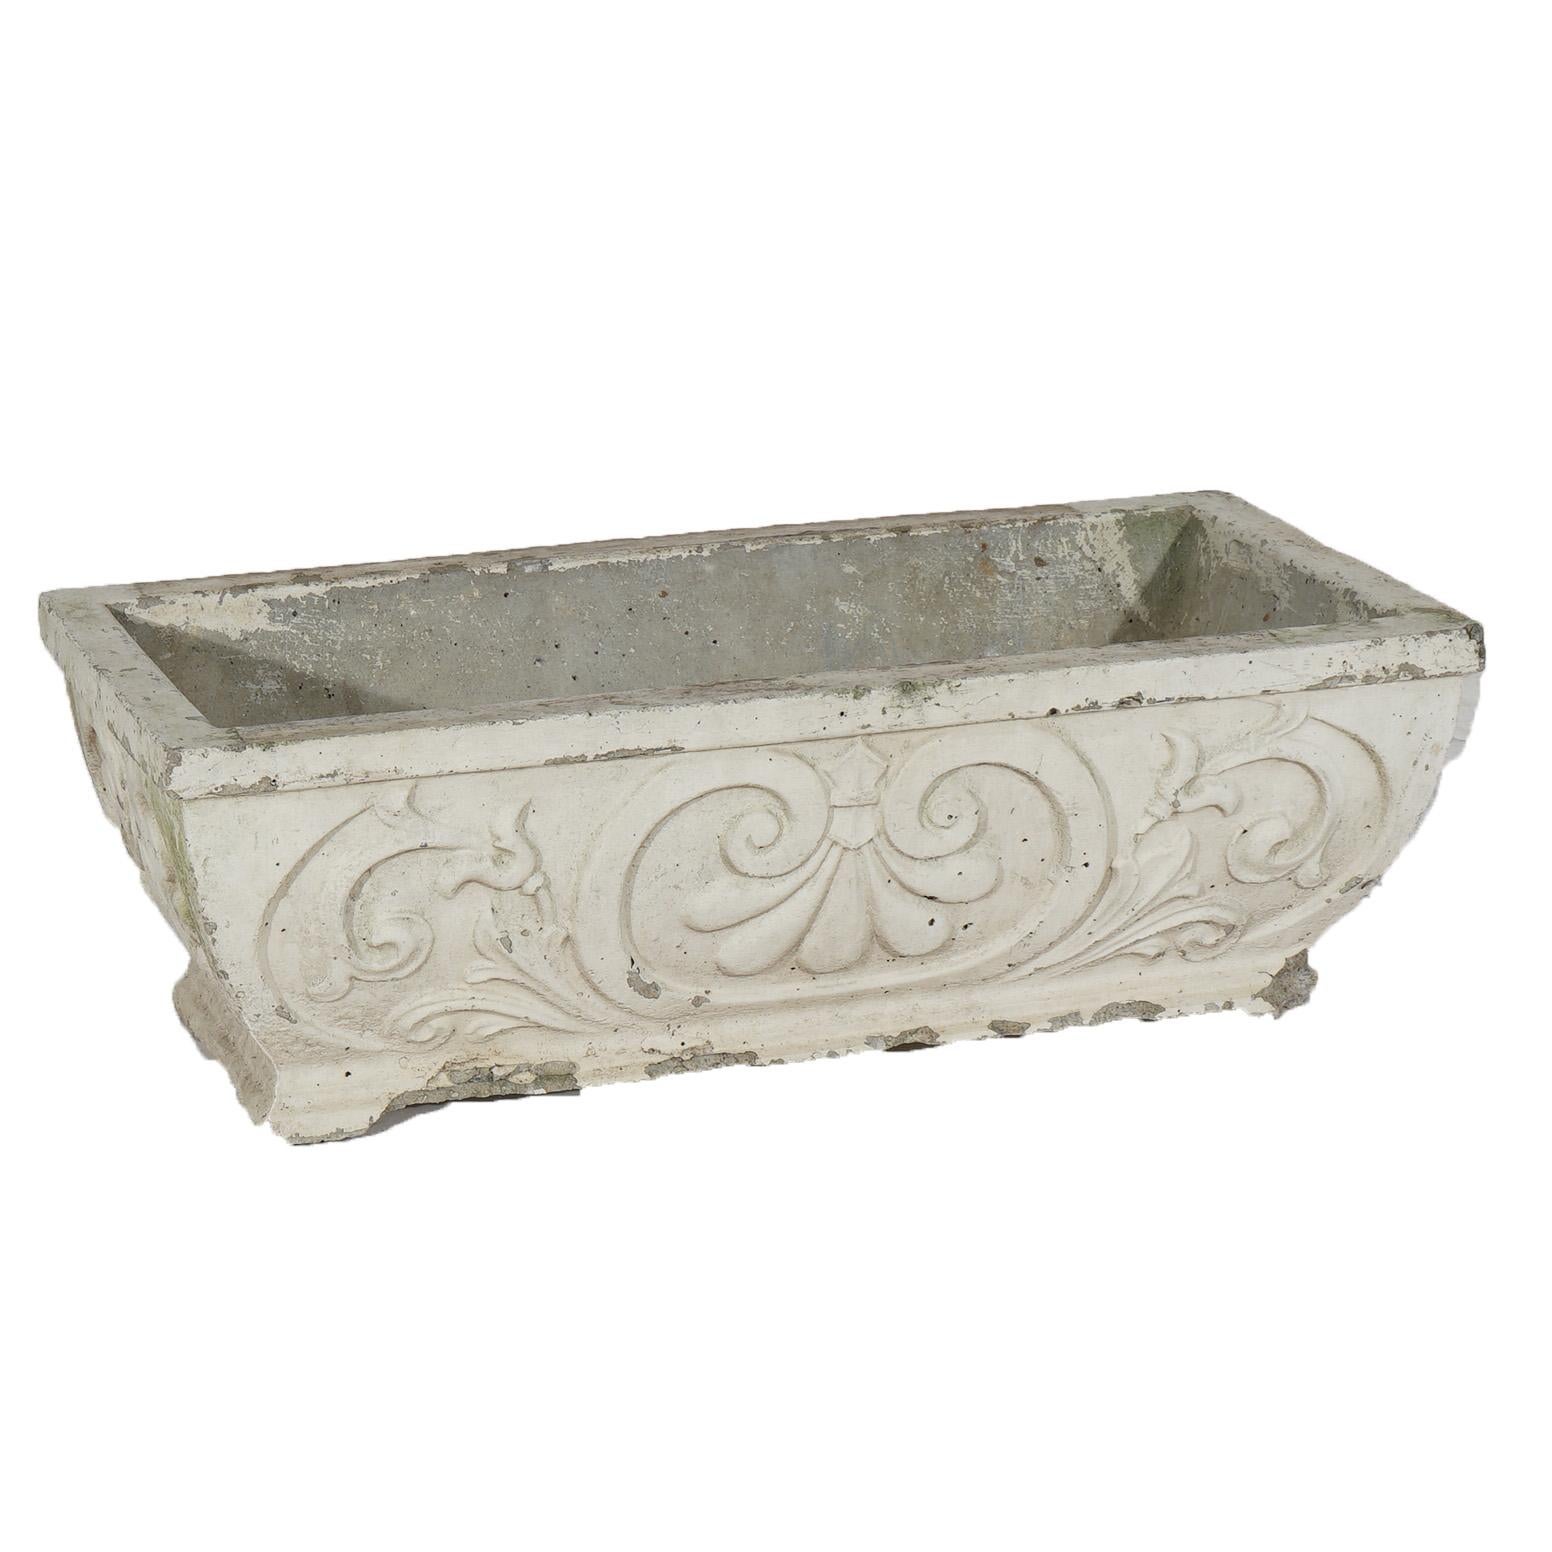 20th Century Cast Hardstone Long Garden or Patio Planter with Scroll Work in Relief 20th C For Sale